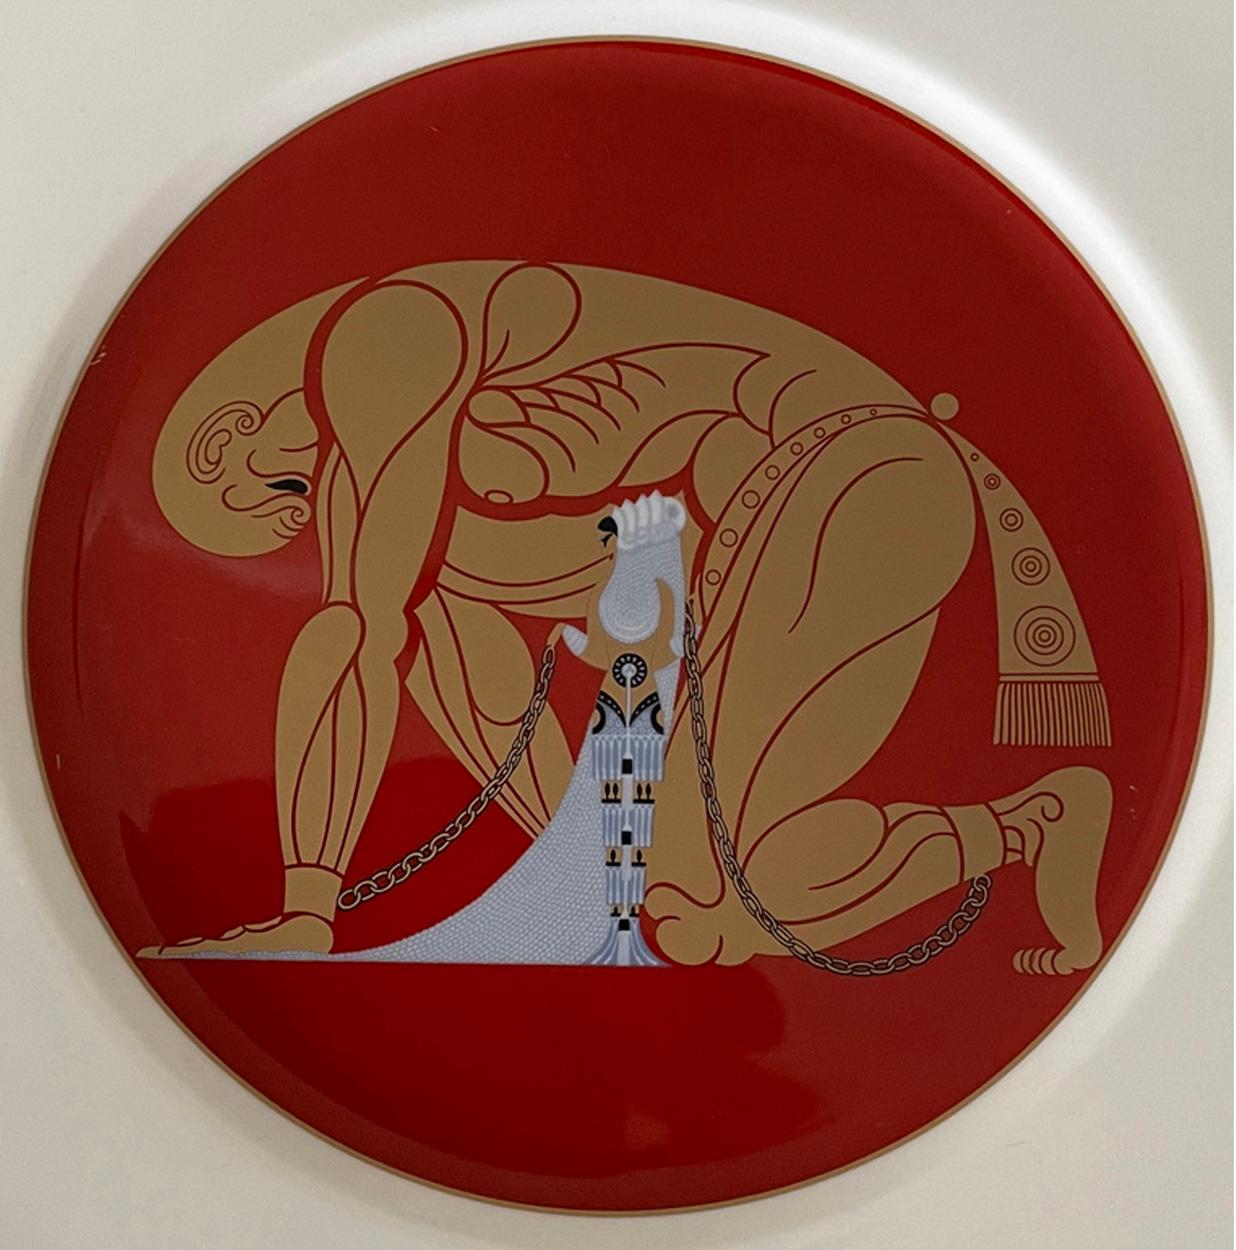 Samson and Delilah Plate is an original decorative plate realized by Erté (after) in 1987. 

The plate in Bone China depicting Samson bound in chains and Delilah in a blue gown. 

Marked with a stylized Erte sign on the back side. Marked on the back